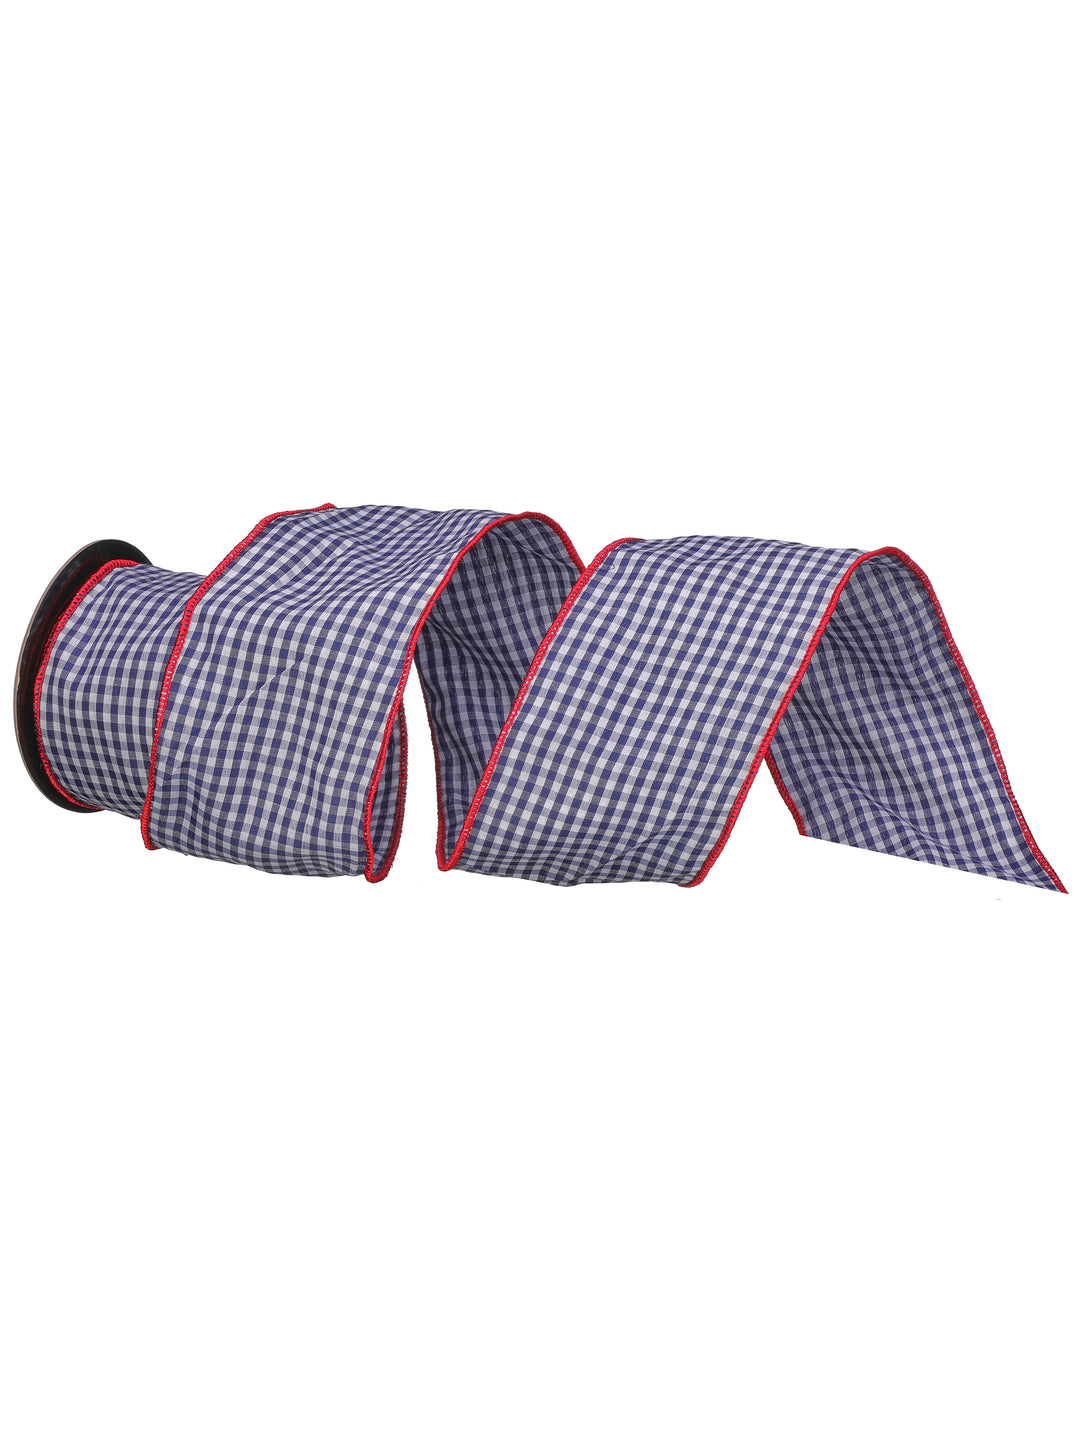 4" x 10 YD Country Check Wired Ribbon in Red/White/Blue